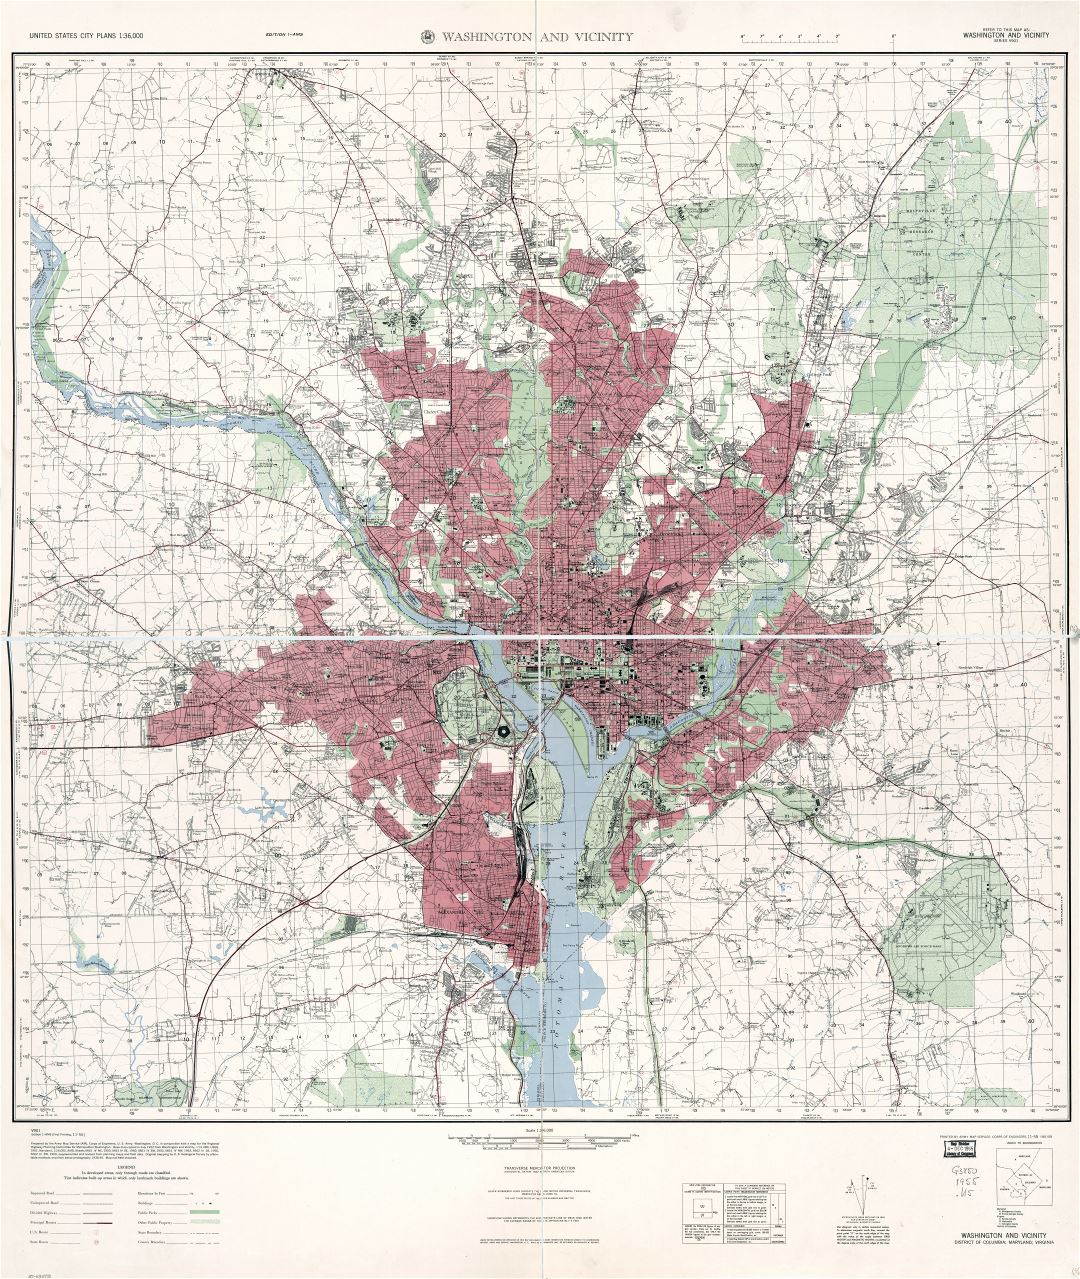 Large scale detailed topographical map of Washington and vicinity - 1955